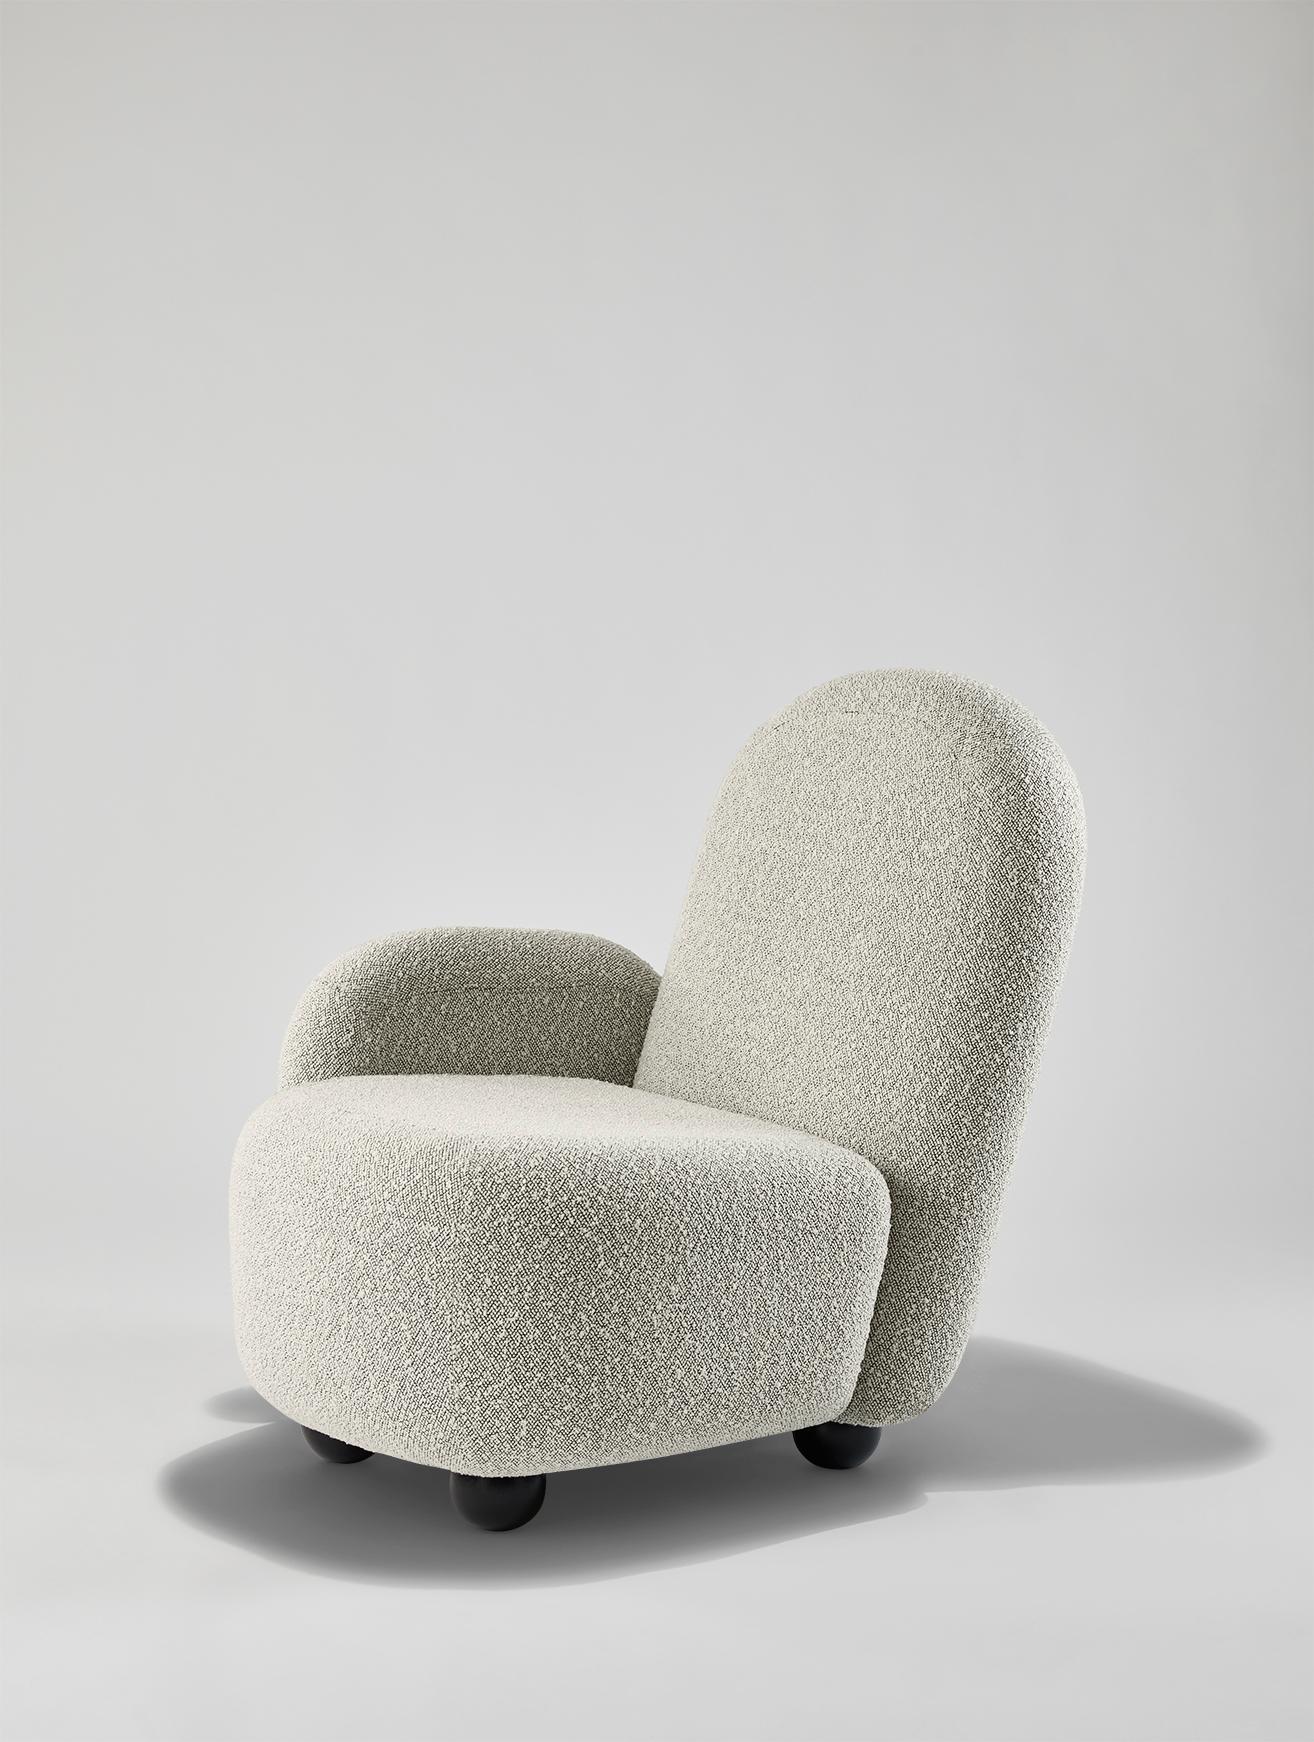 French Off-White Armchair Miss Franck by Hervé Langlais Chenille Fabric Made in France  For Sale